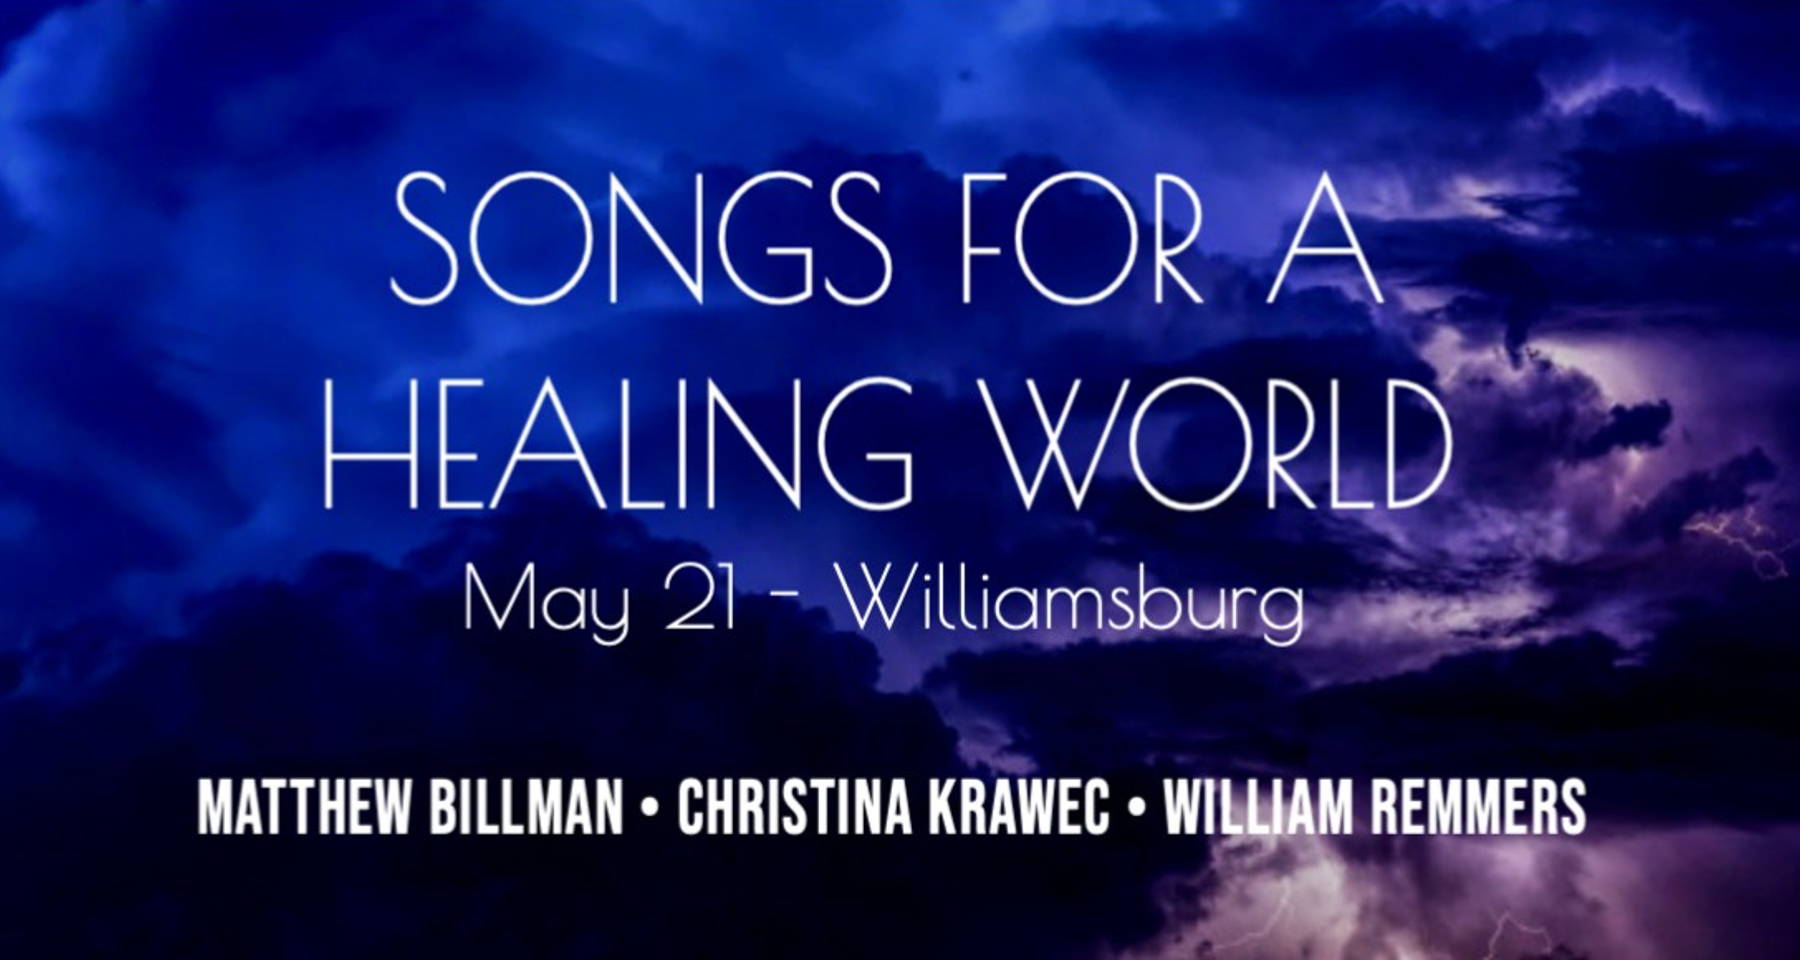 Songs for a Healing World: A Celebration of Live Music in the Greatest City on Earth!